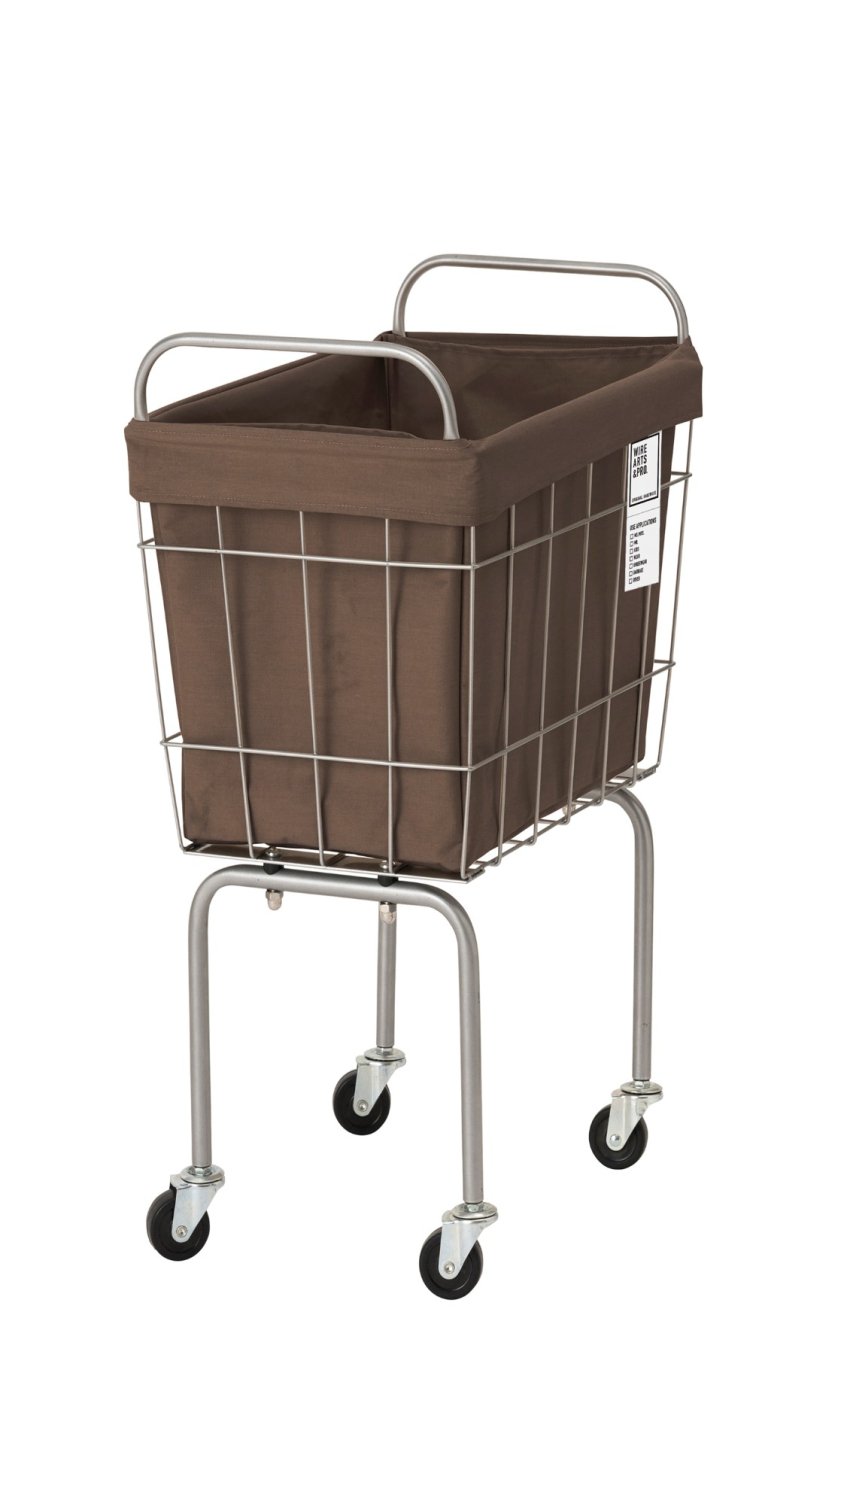 LAUNDRY SQUARE BASKET with CASTER LEG